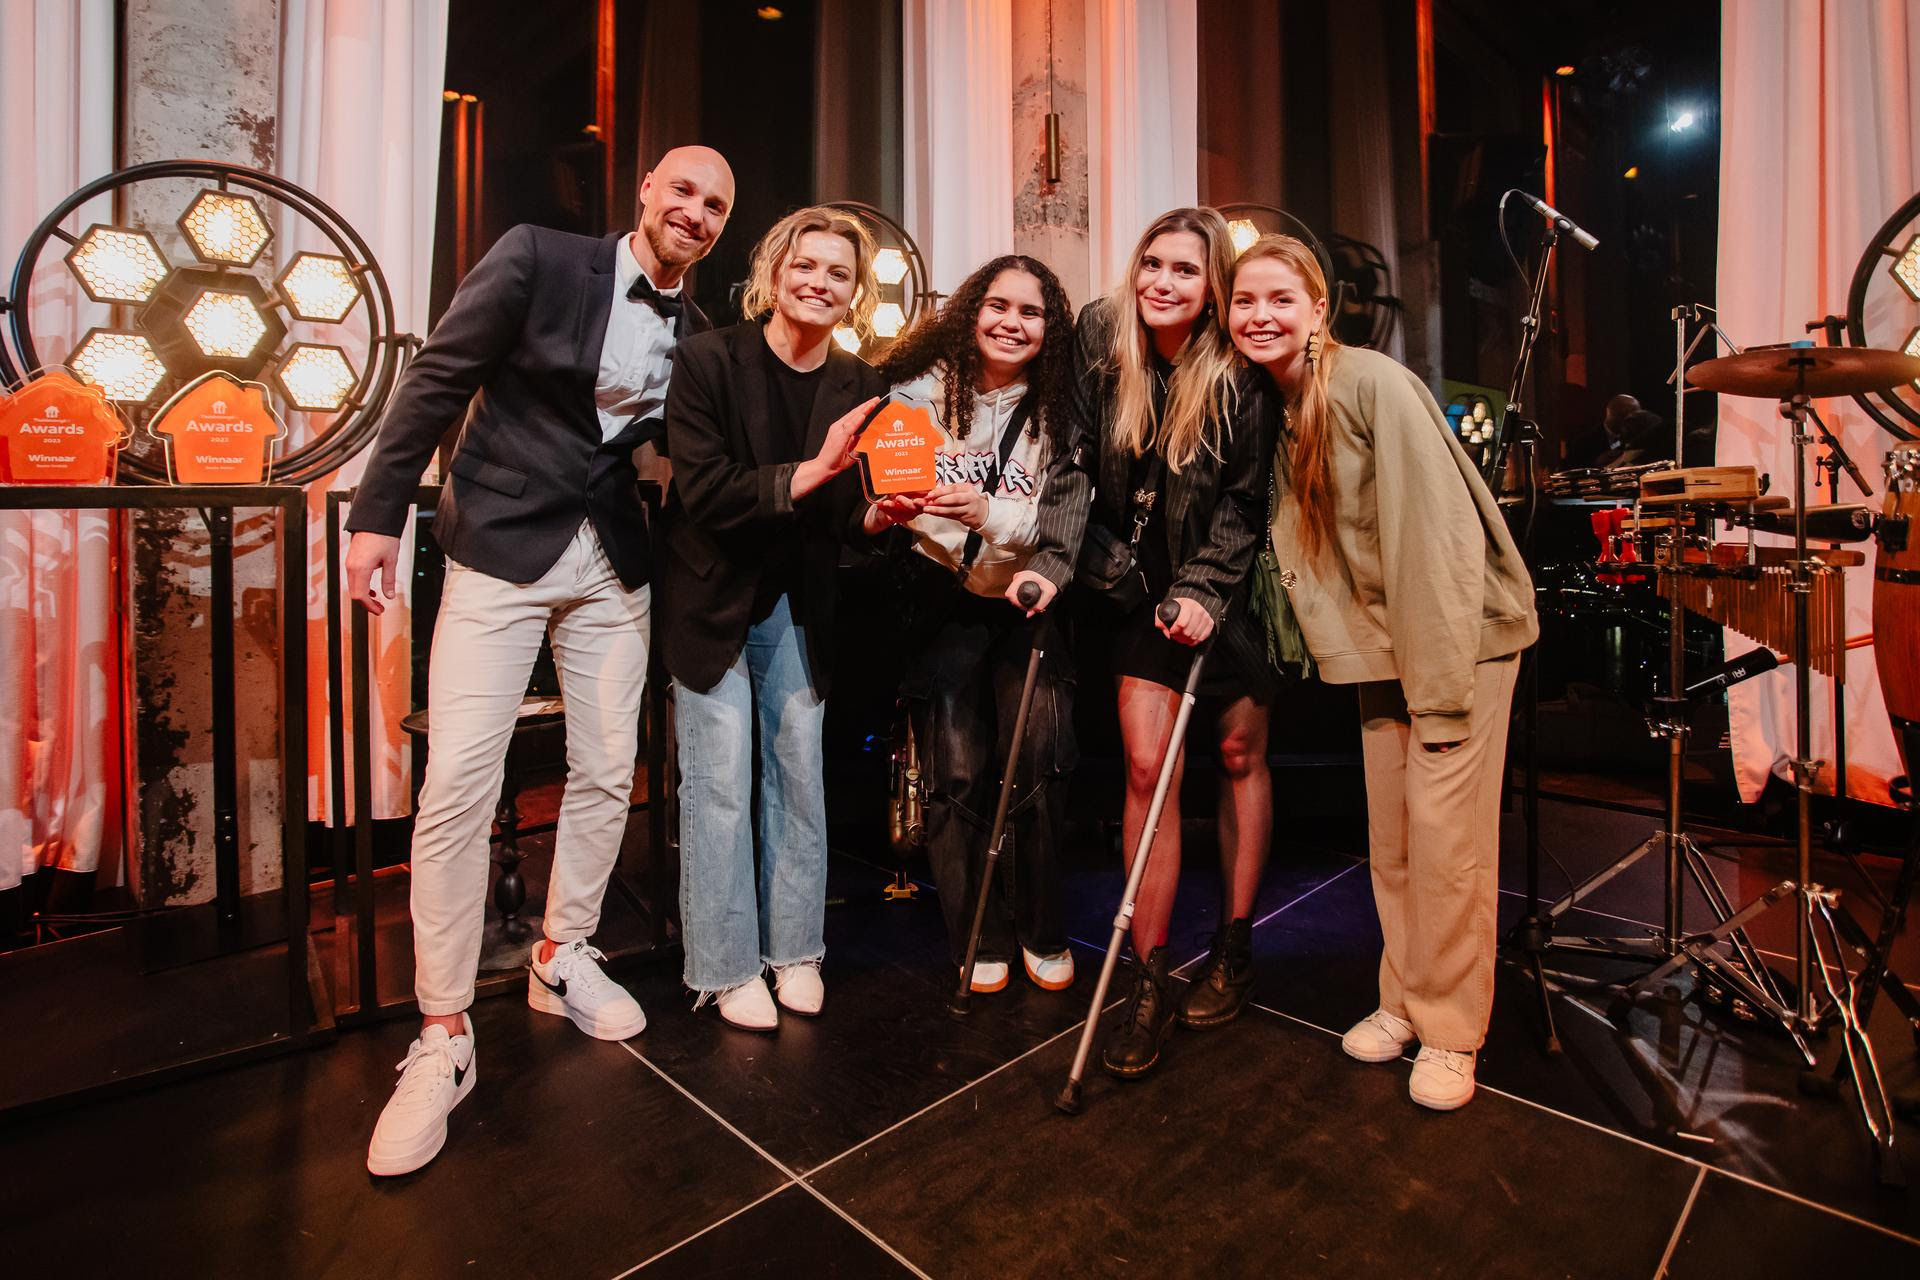 Owner of SNOEI, Naomi Snoei (second from the left), with her team from Rotterdam, holding the Thuisbezorgd.nl Award 2023 for Best Healthy Restaurant in the Netherlands. Photo credits: Fitchd